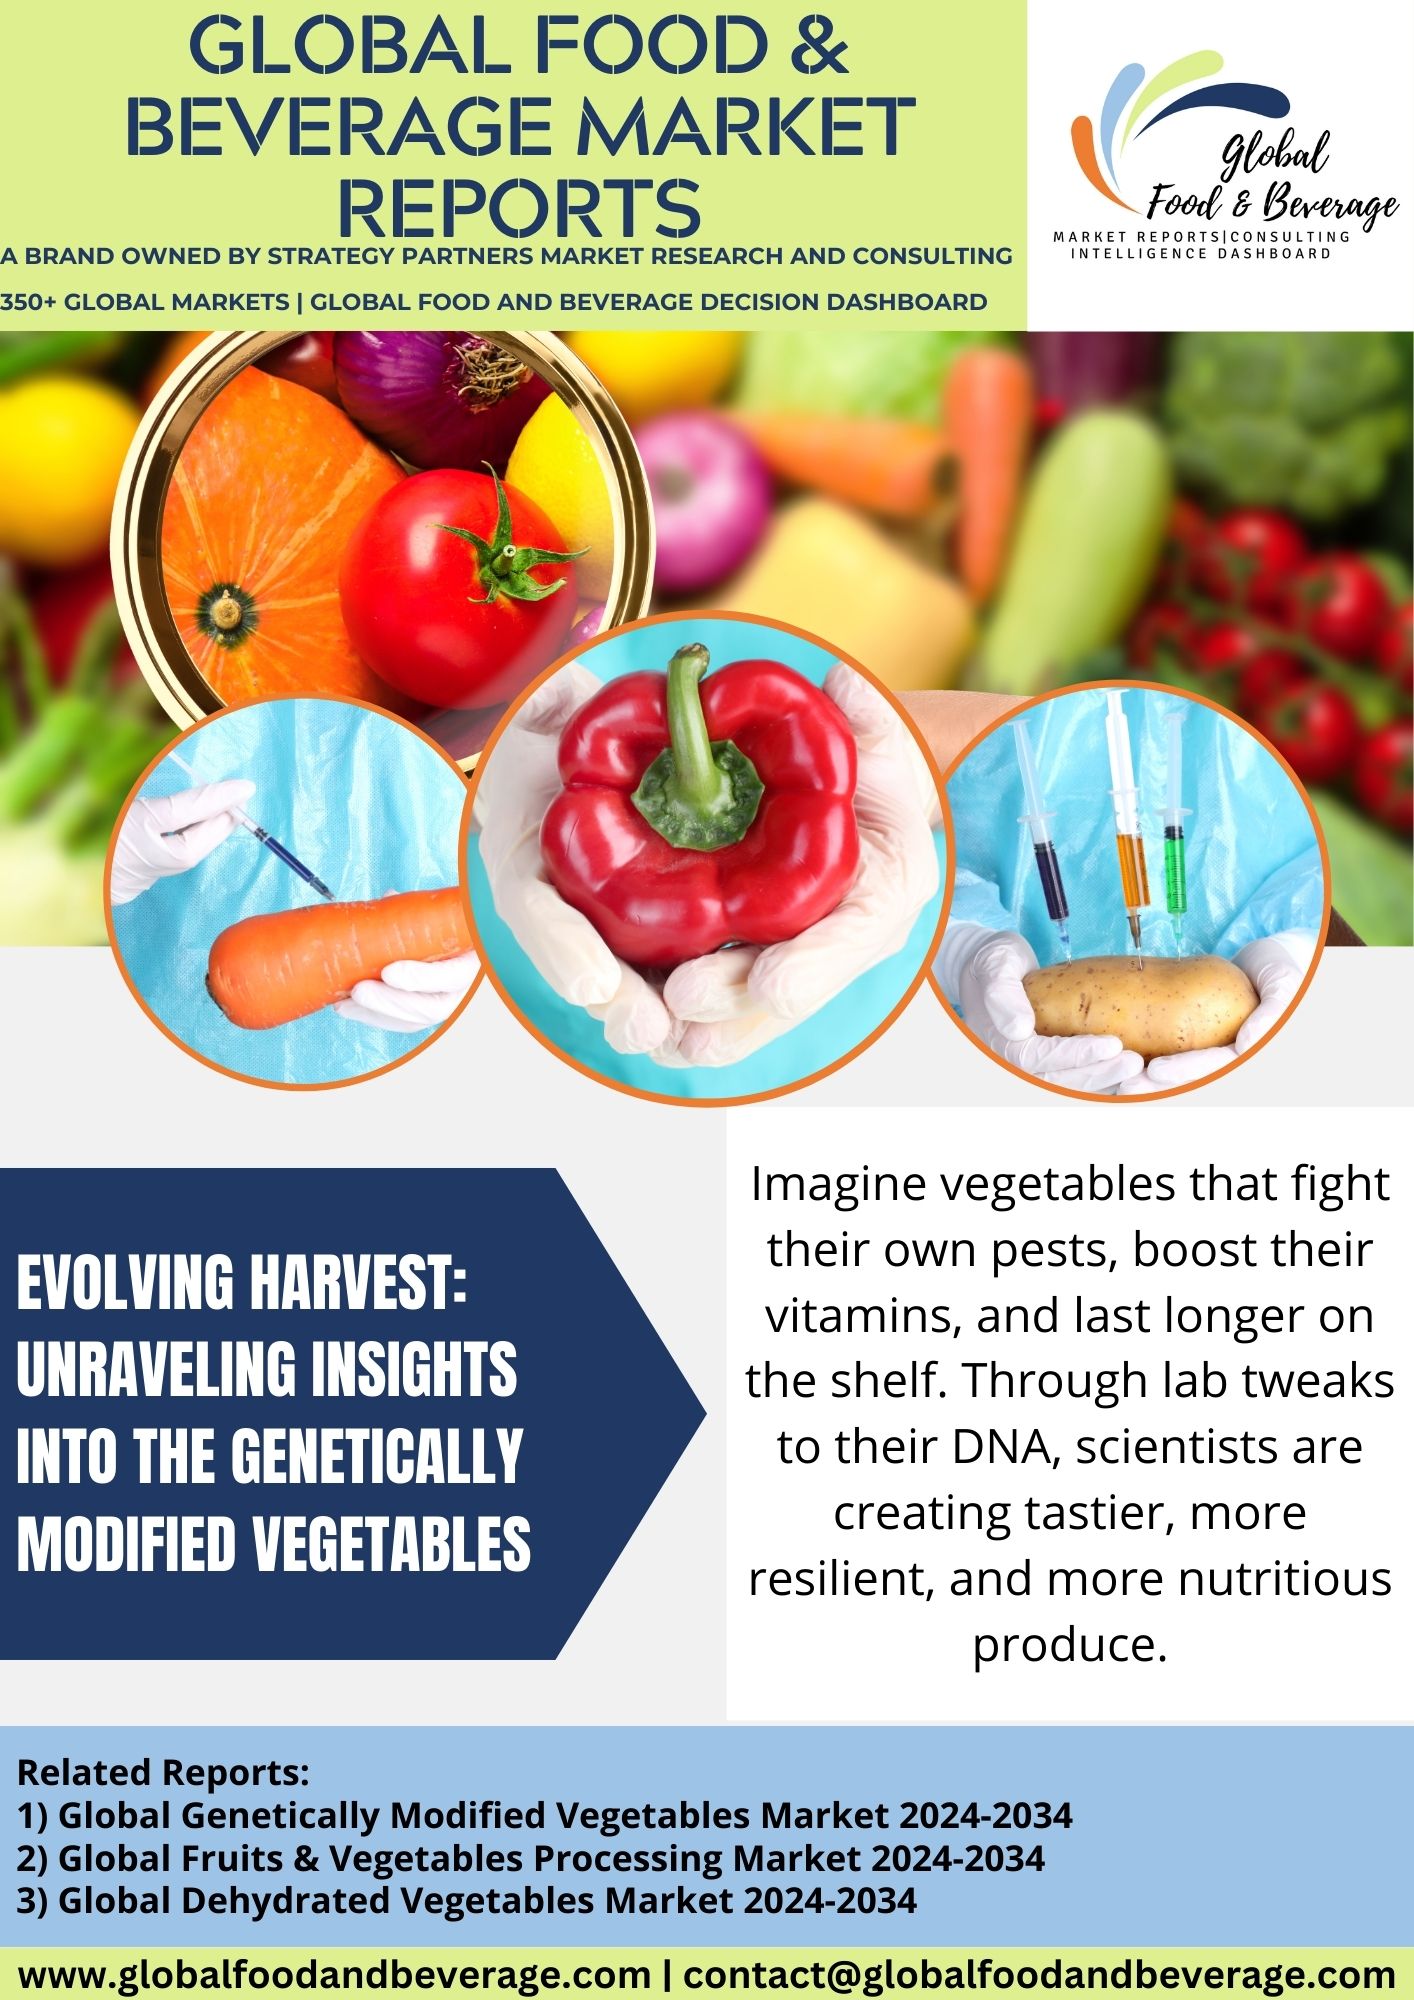 Evolving Harvest: Unraveling Insights into the Genetically Modified Vegetables Market